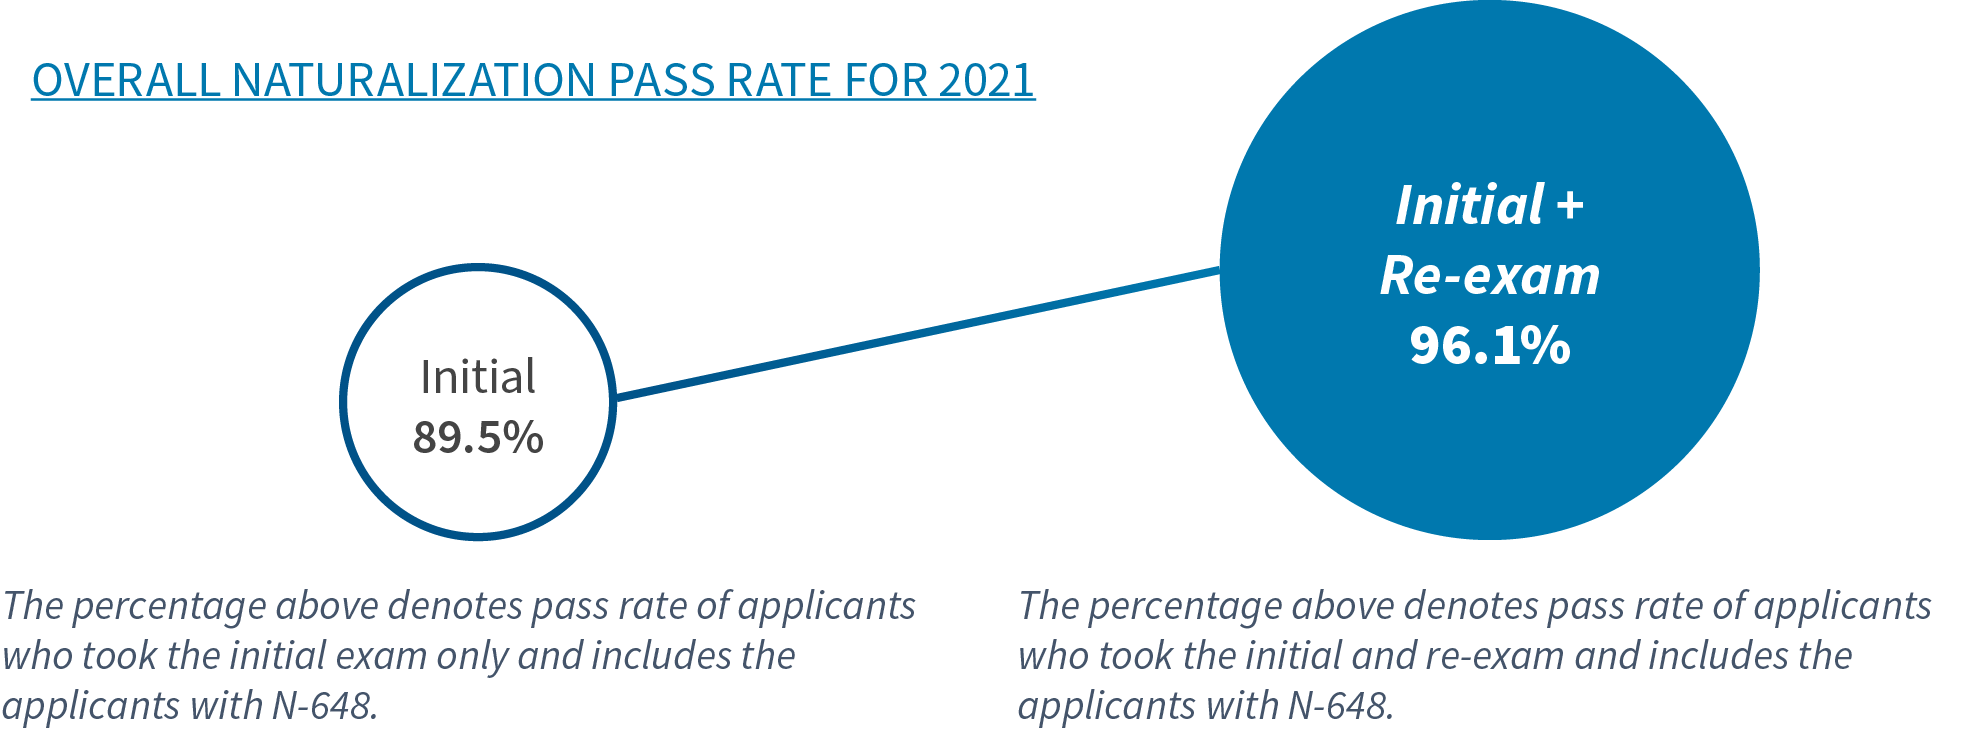 Overall Naturalization Pass Rate for 2021